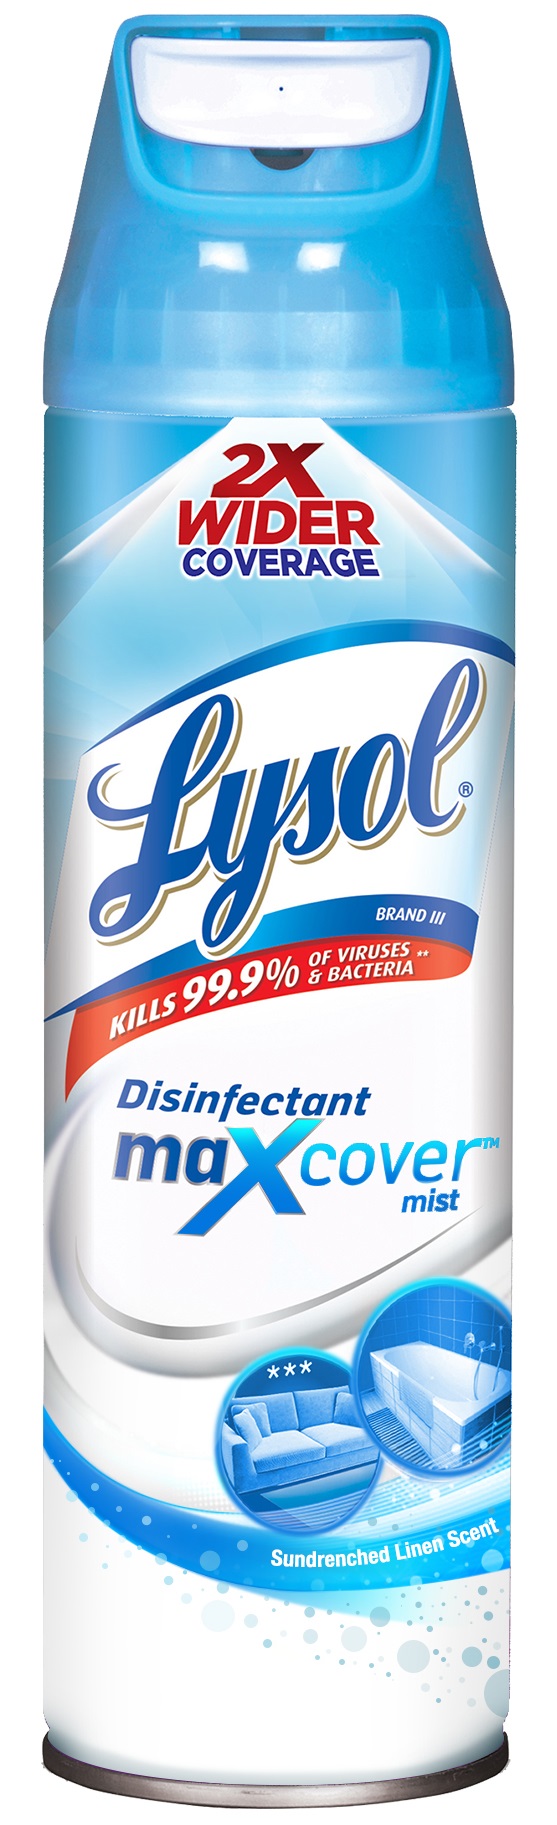 LYSOL Disinfectant Max Cover Mist  Sundrenched Linen Discontinued June 2021